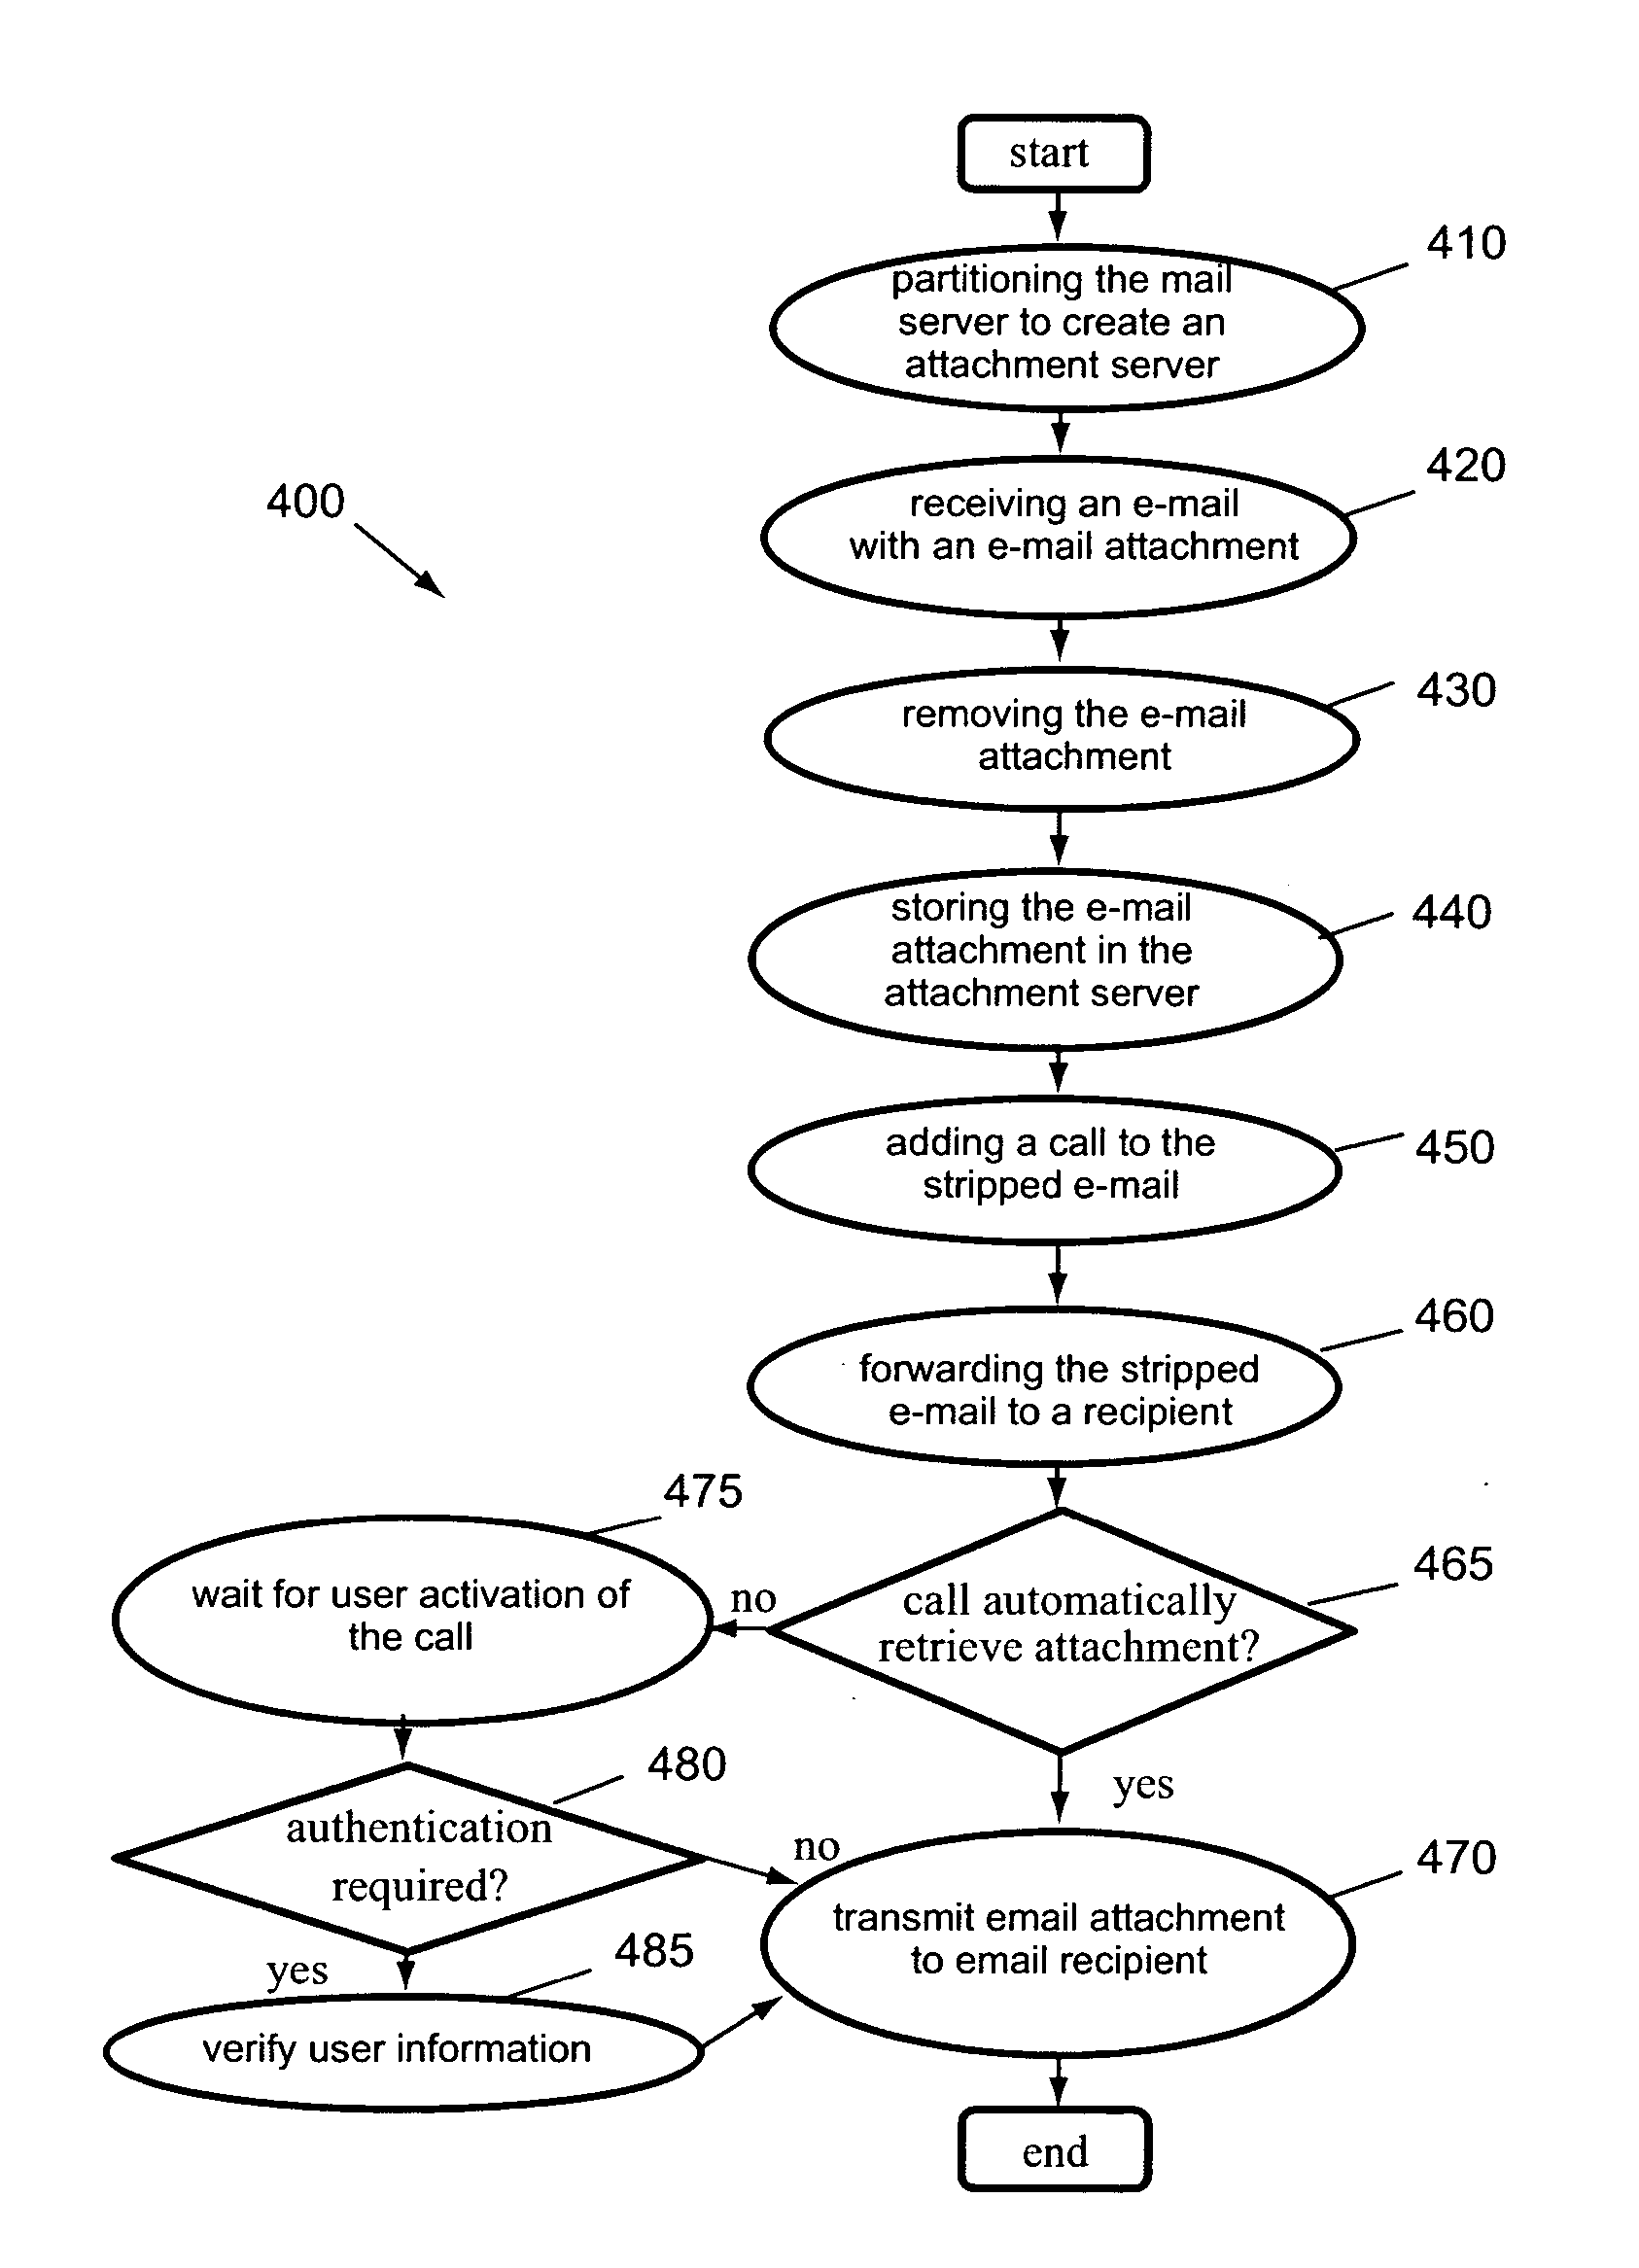 Selective transmission of an email attachment